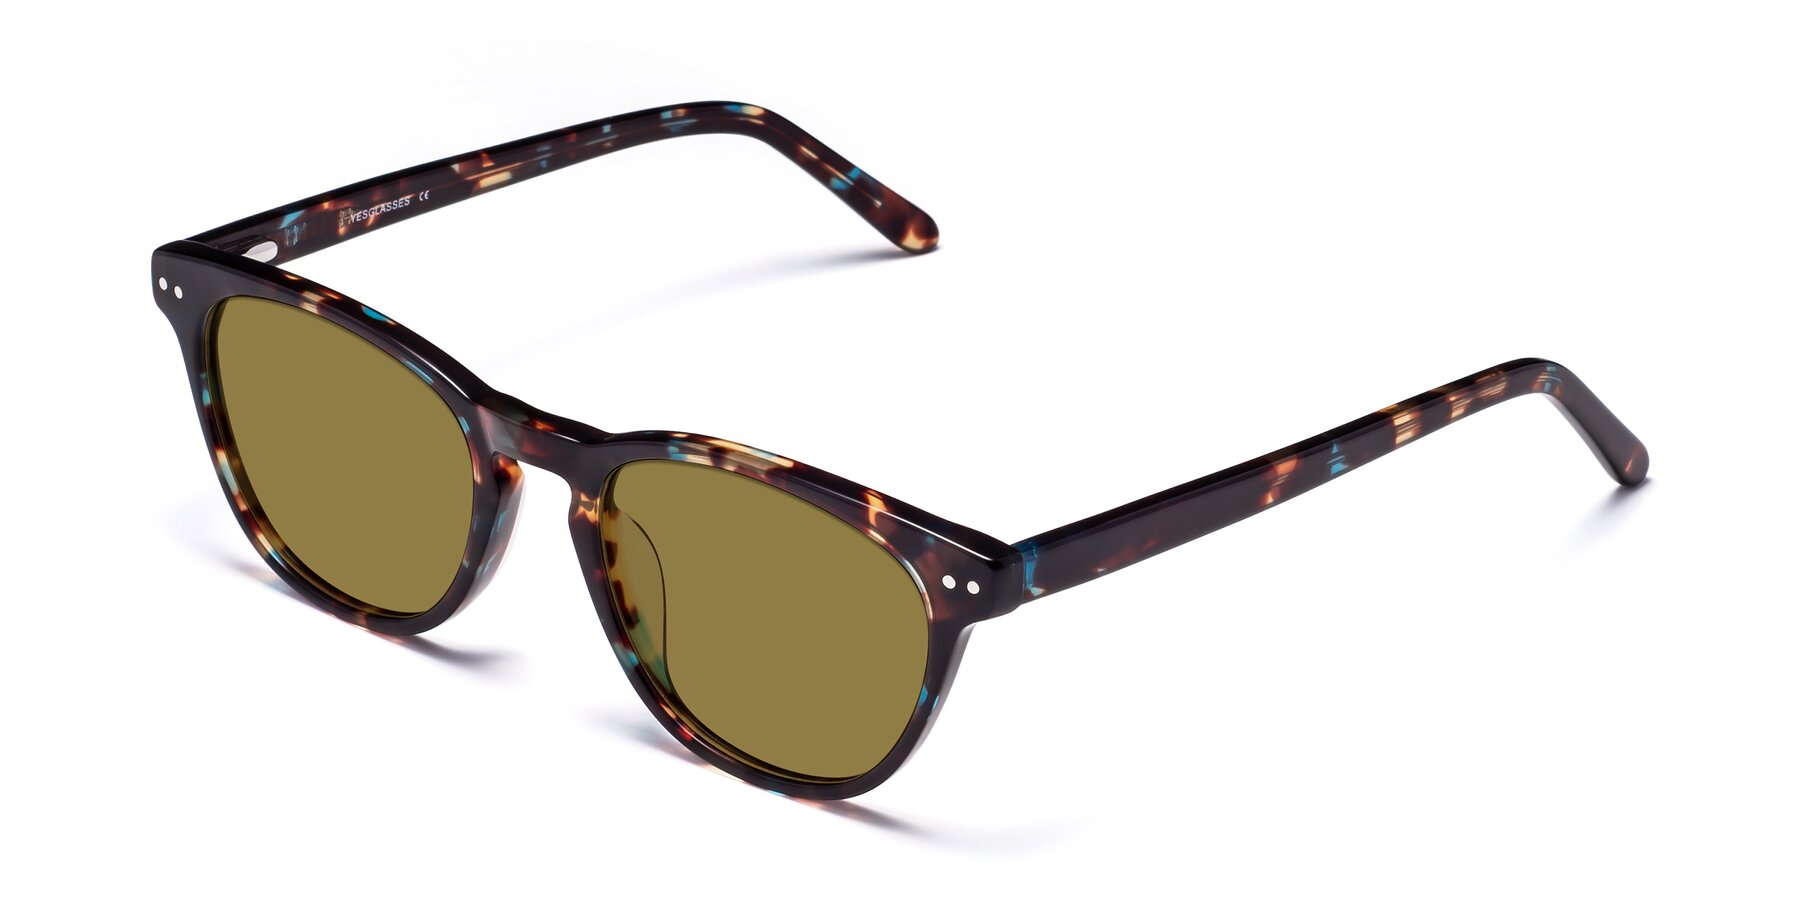 Angle of Blaze in Tortoise-Blue with Brown Polarized Lenses